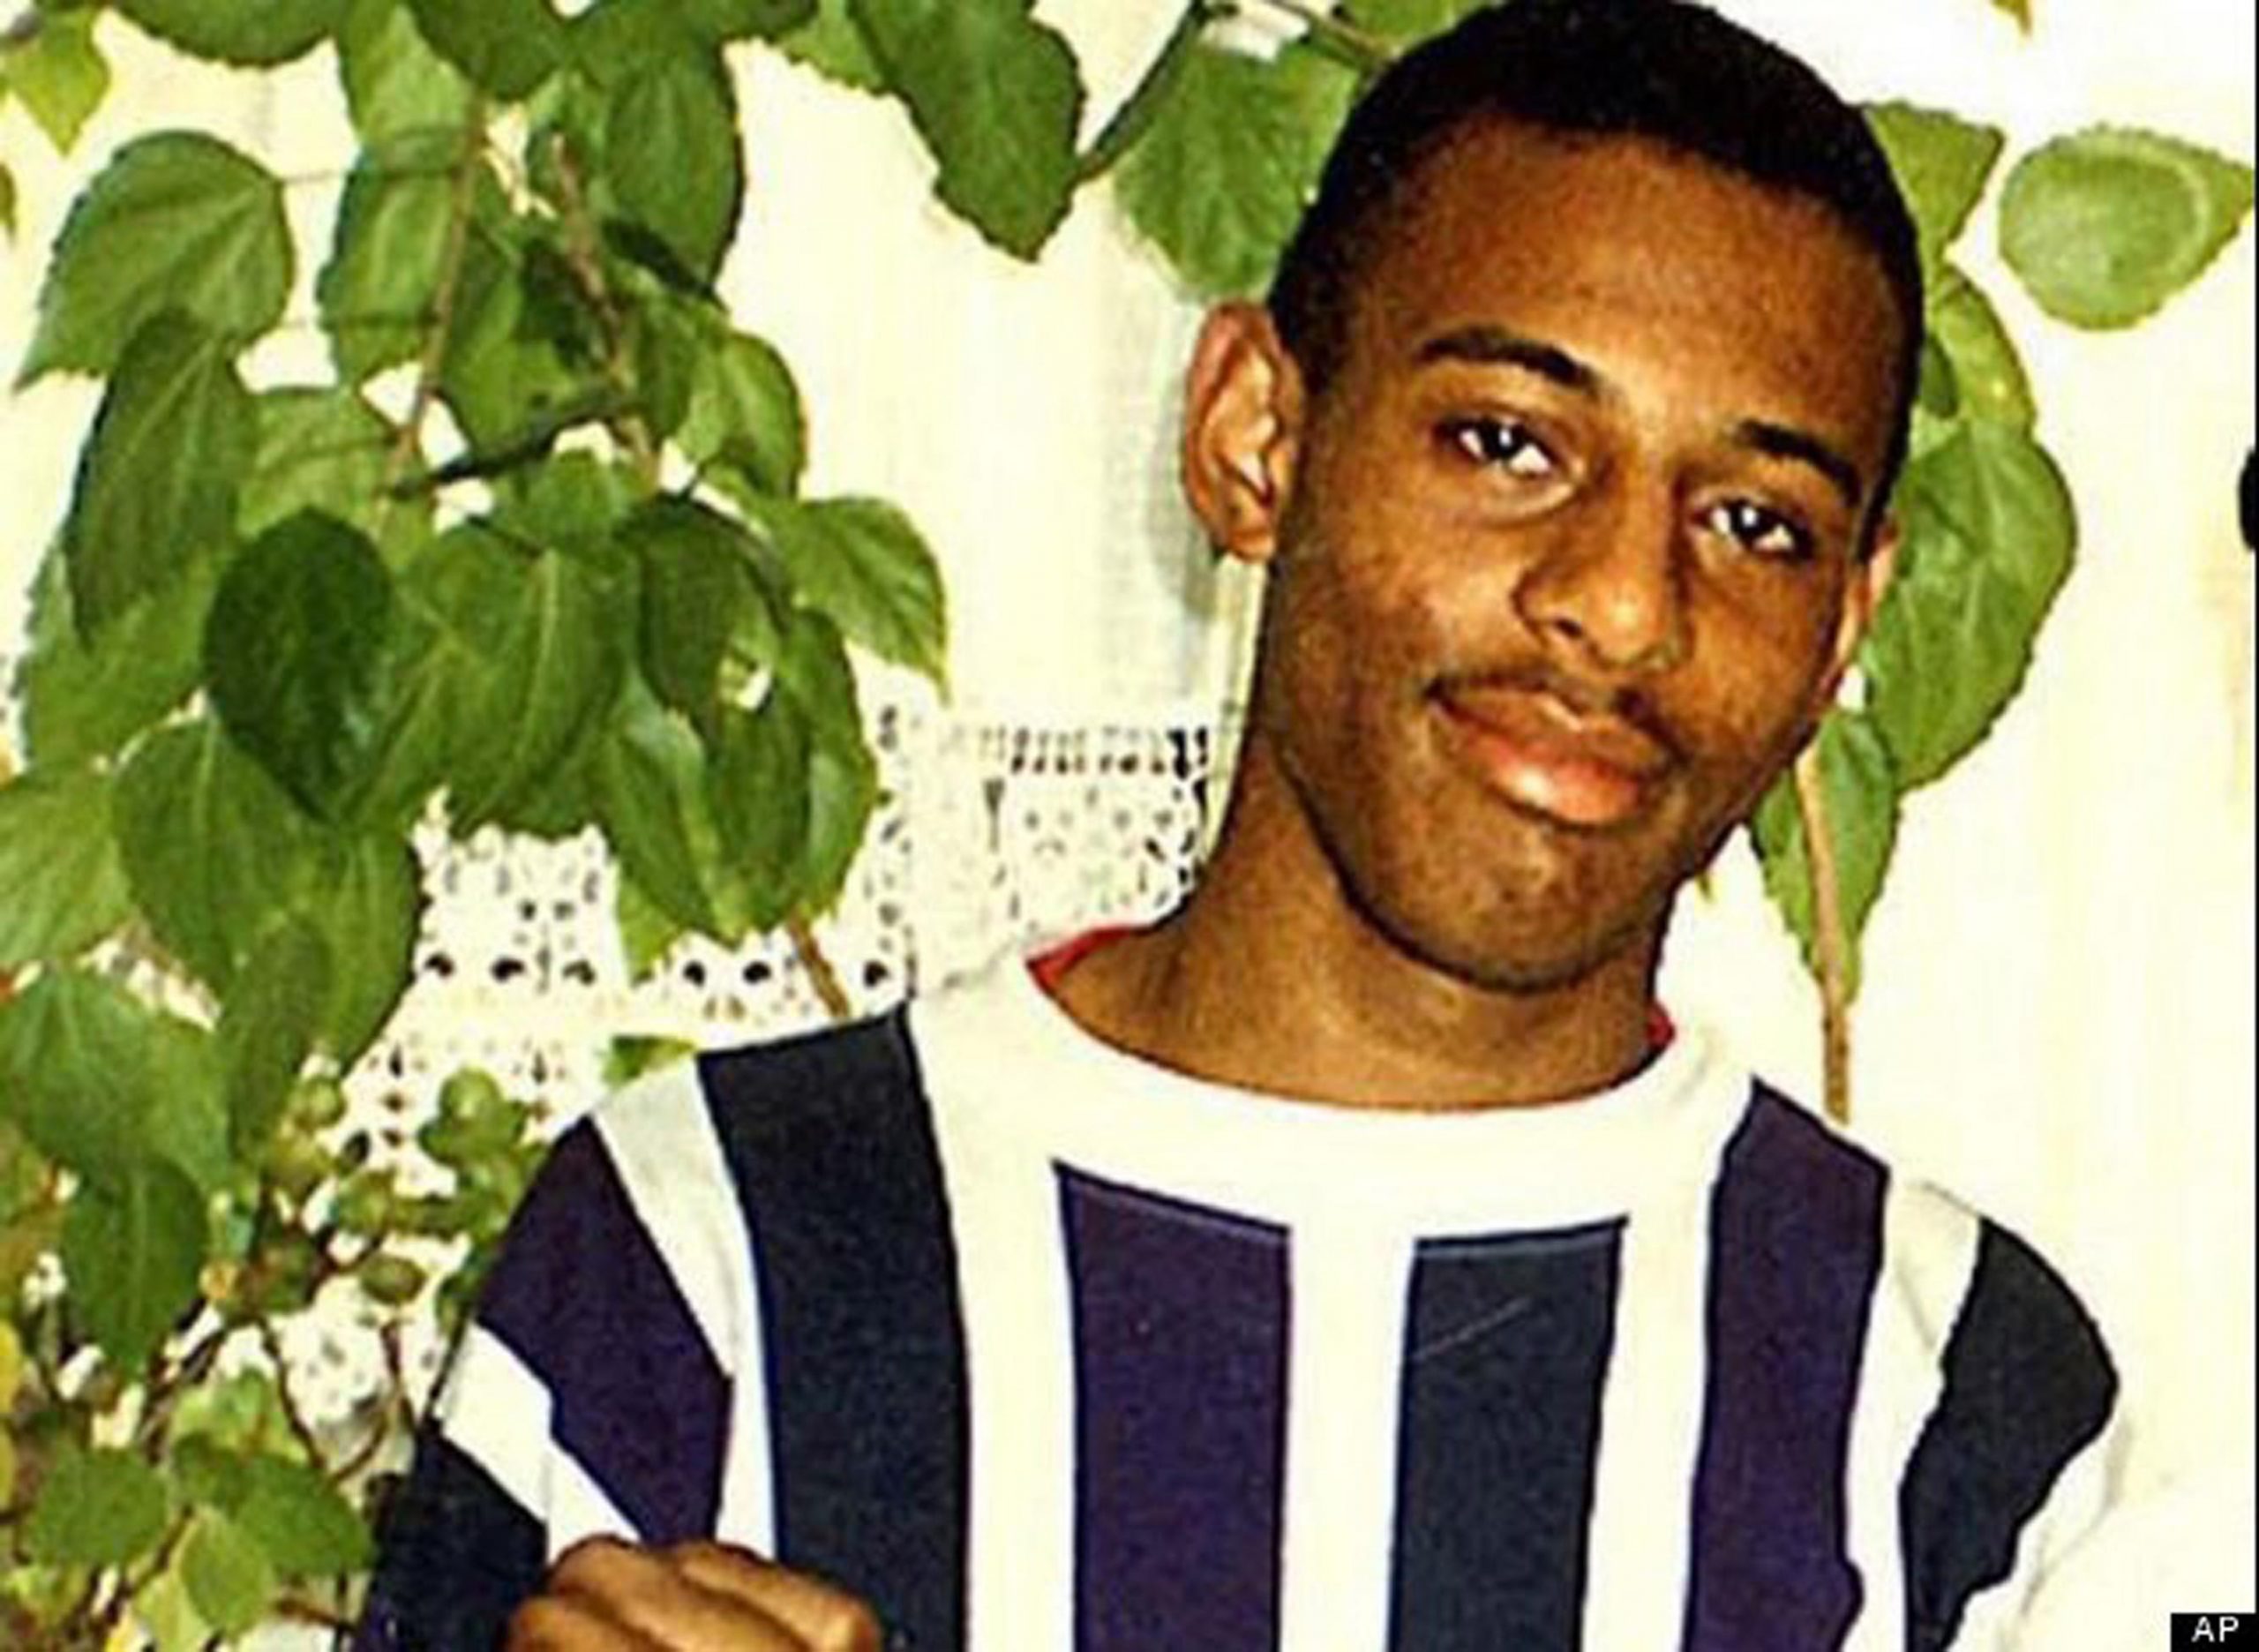 Last year marked the 25th anniversary of the murder of Stephen Lawrence